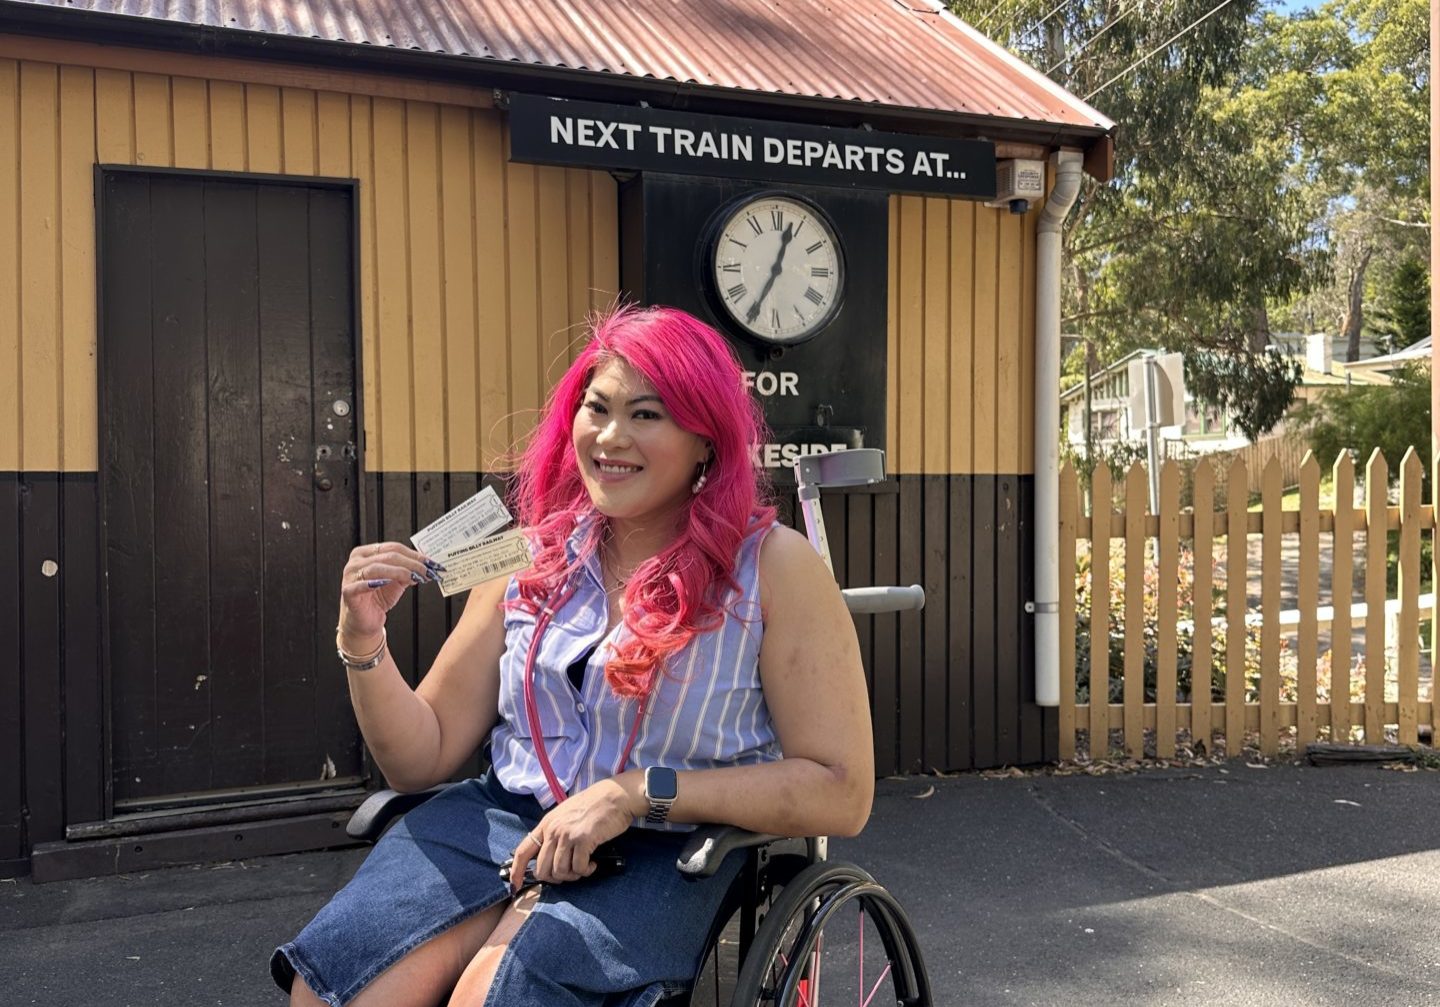 A woman in a wheelchair in front of a yellow and brown painted wooden building. An old-style clock can be seen in the background, showing the departure of the next train. The woman is holding her Puffing Billy tickets and smiling at the camera.